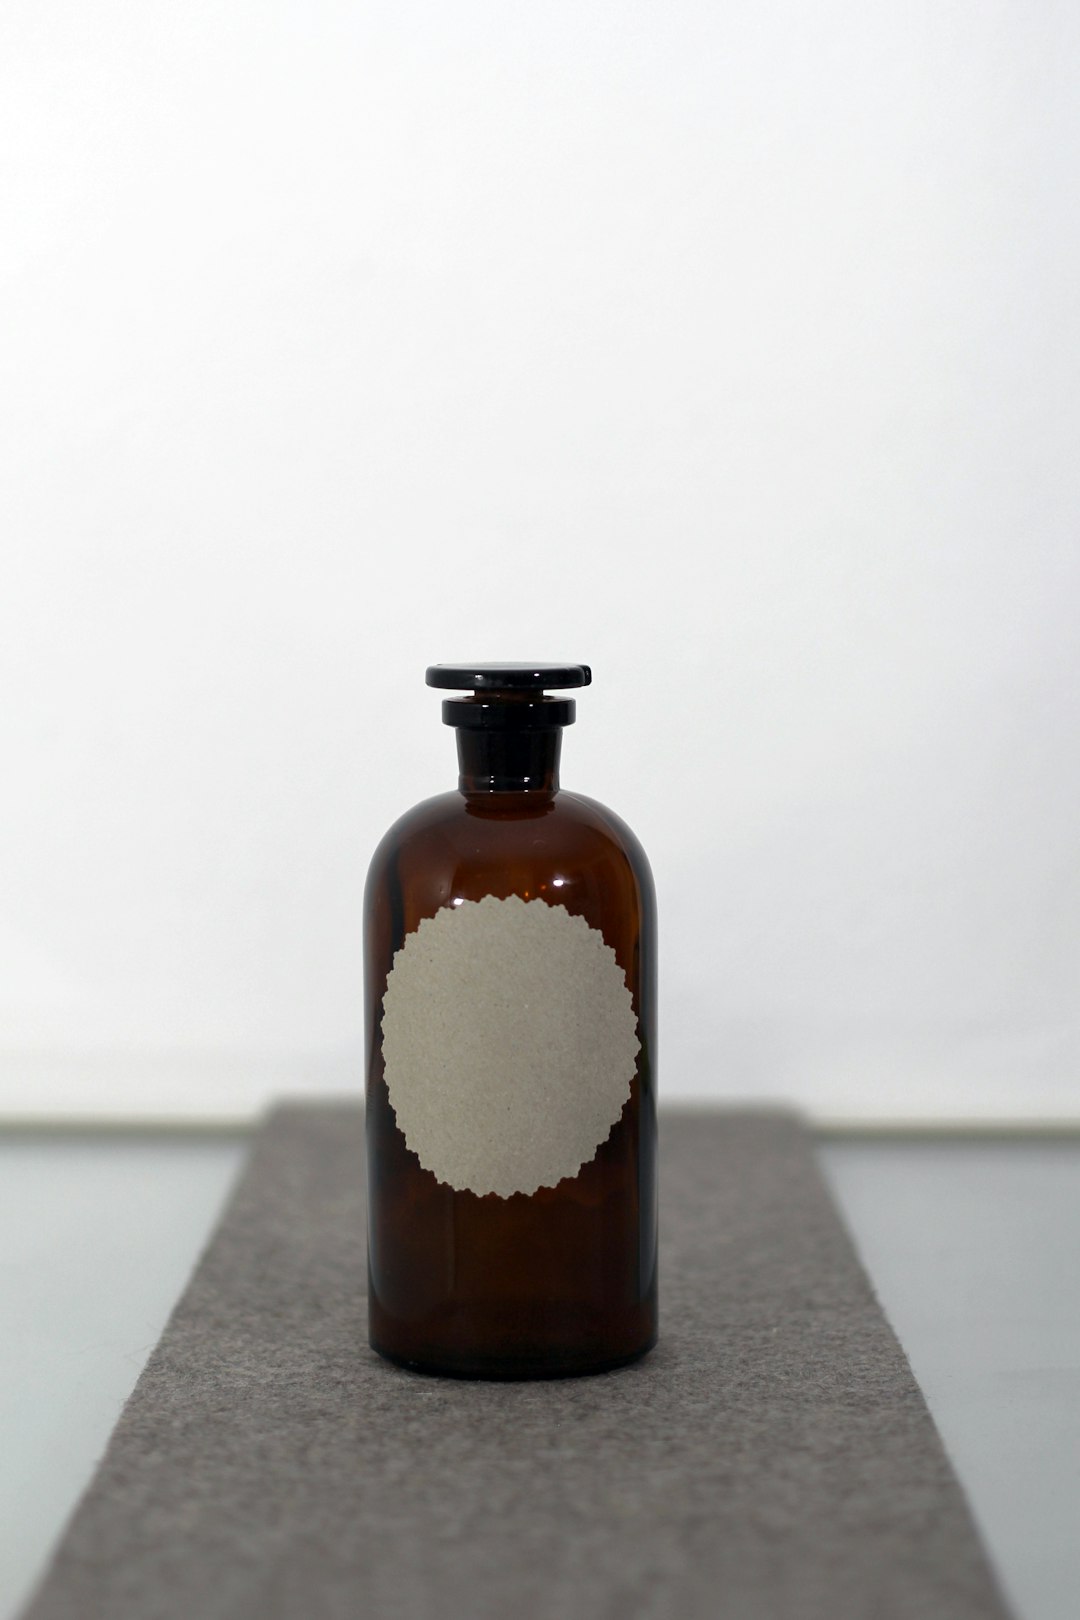 Soy sauce bottle and soybeans